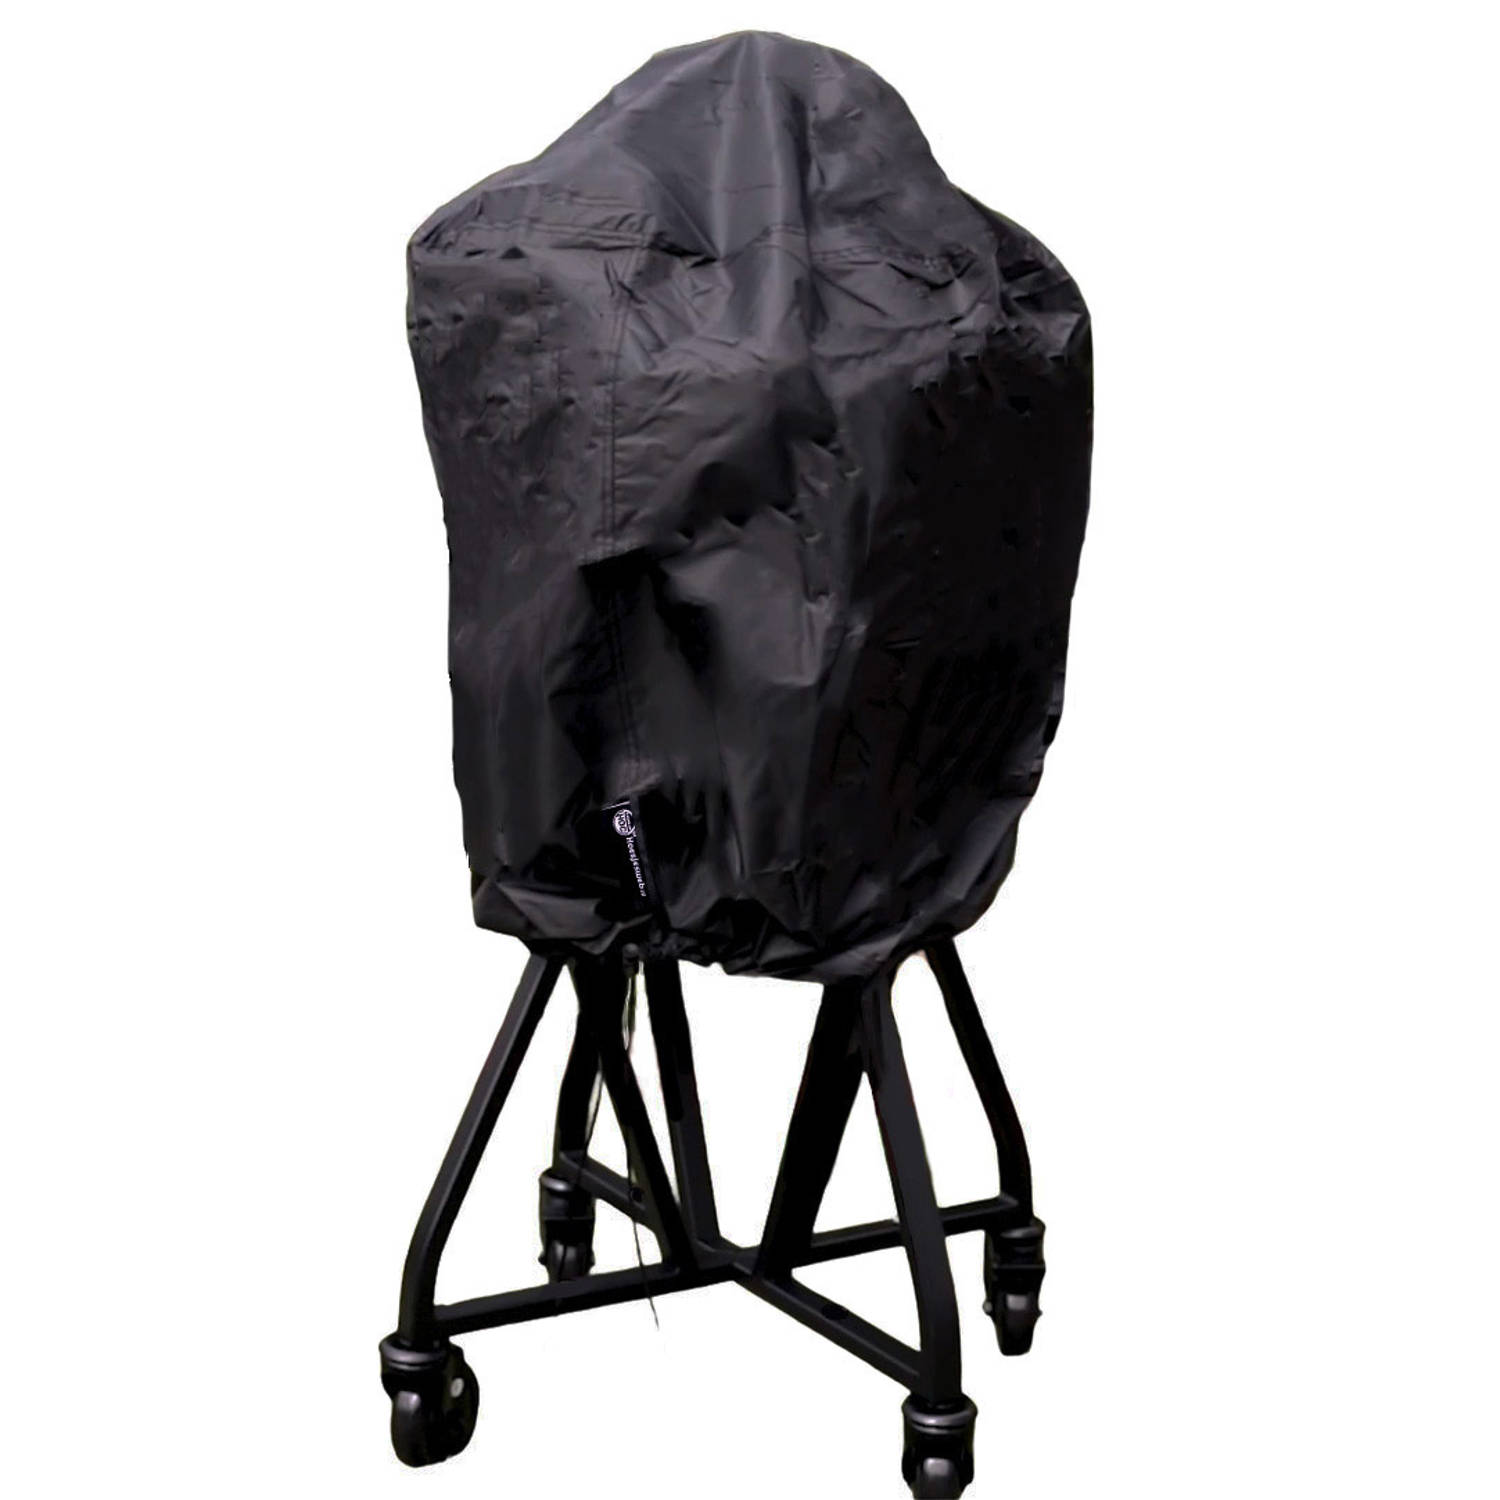 Cuhoc Bbq Hoes Bbq Hoes Weber 80x66x100 Bbq Hoes Waterdicht Redlabel